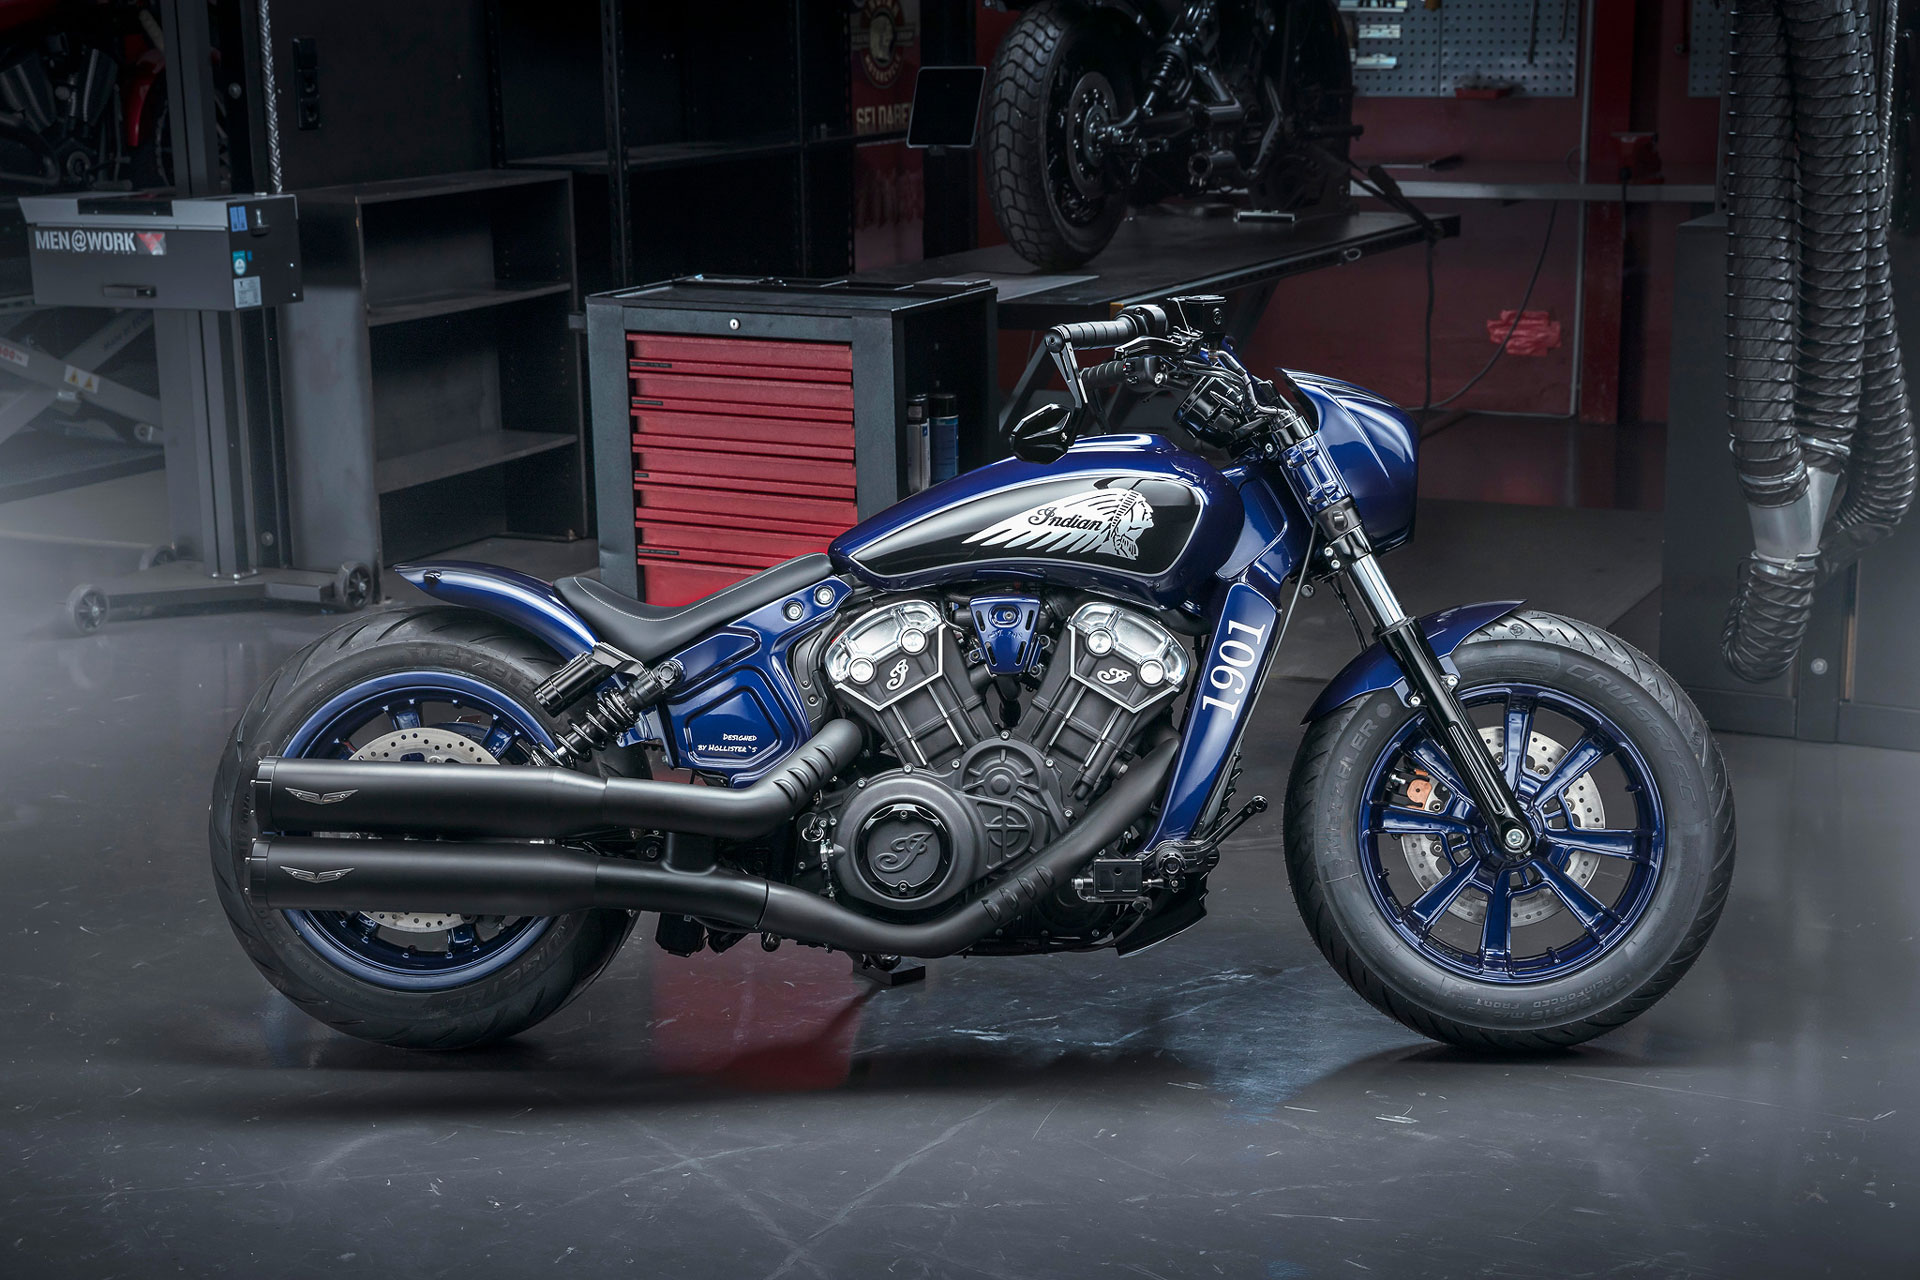 HOLLISTER'S - Hollister's MotorCycles